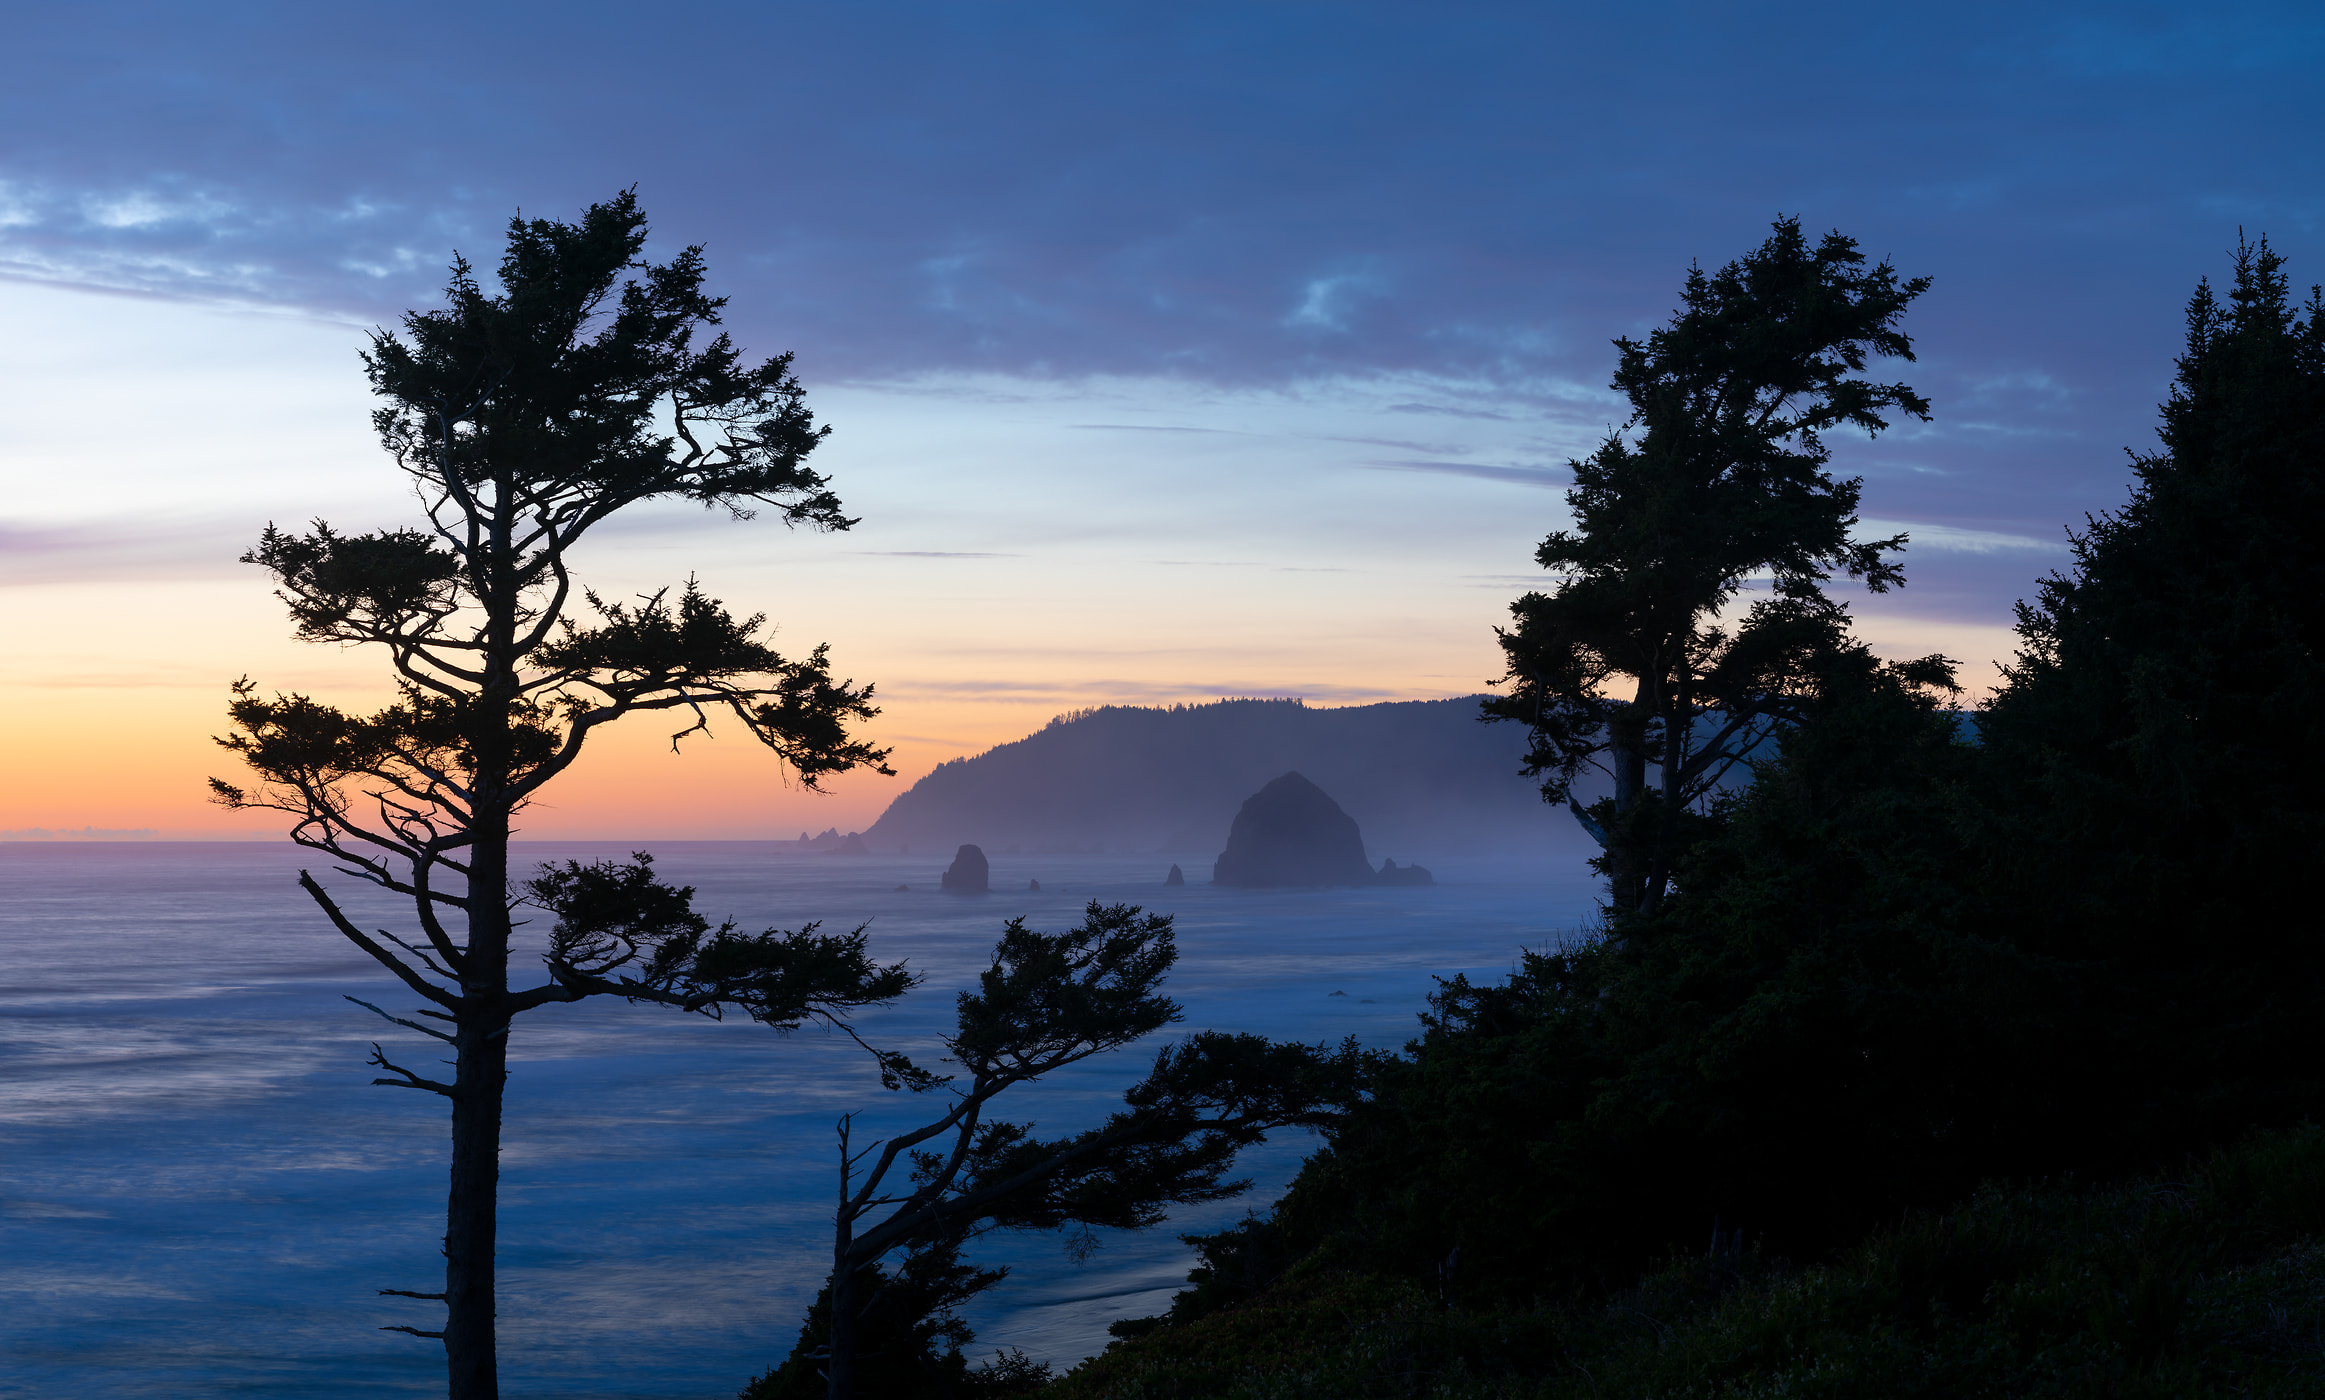 303 megapixels! A very high resolution, large-format VAST photo print of a coastal sunset with the ocean and trees; landscape photograph created by Greg Probst in Cannon Beach, Oregon.